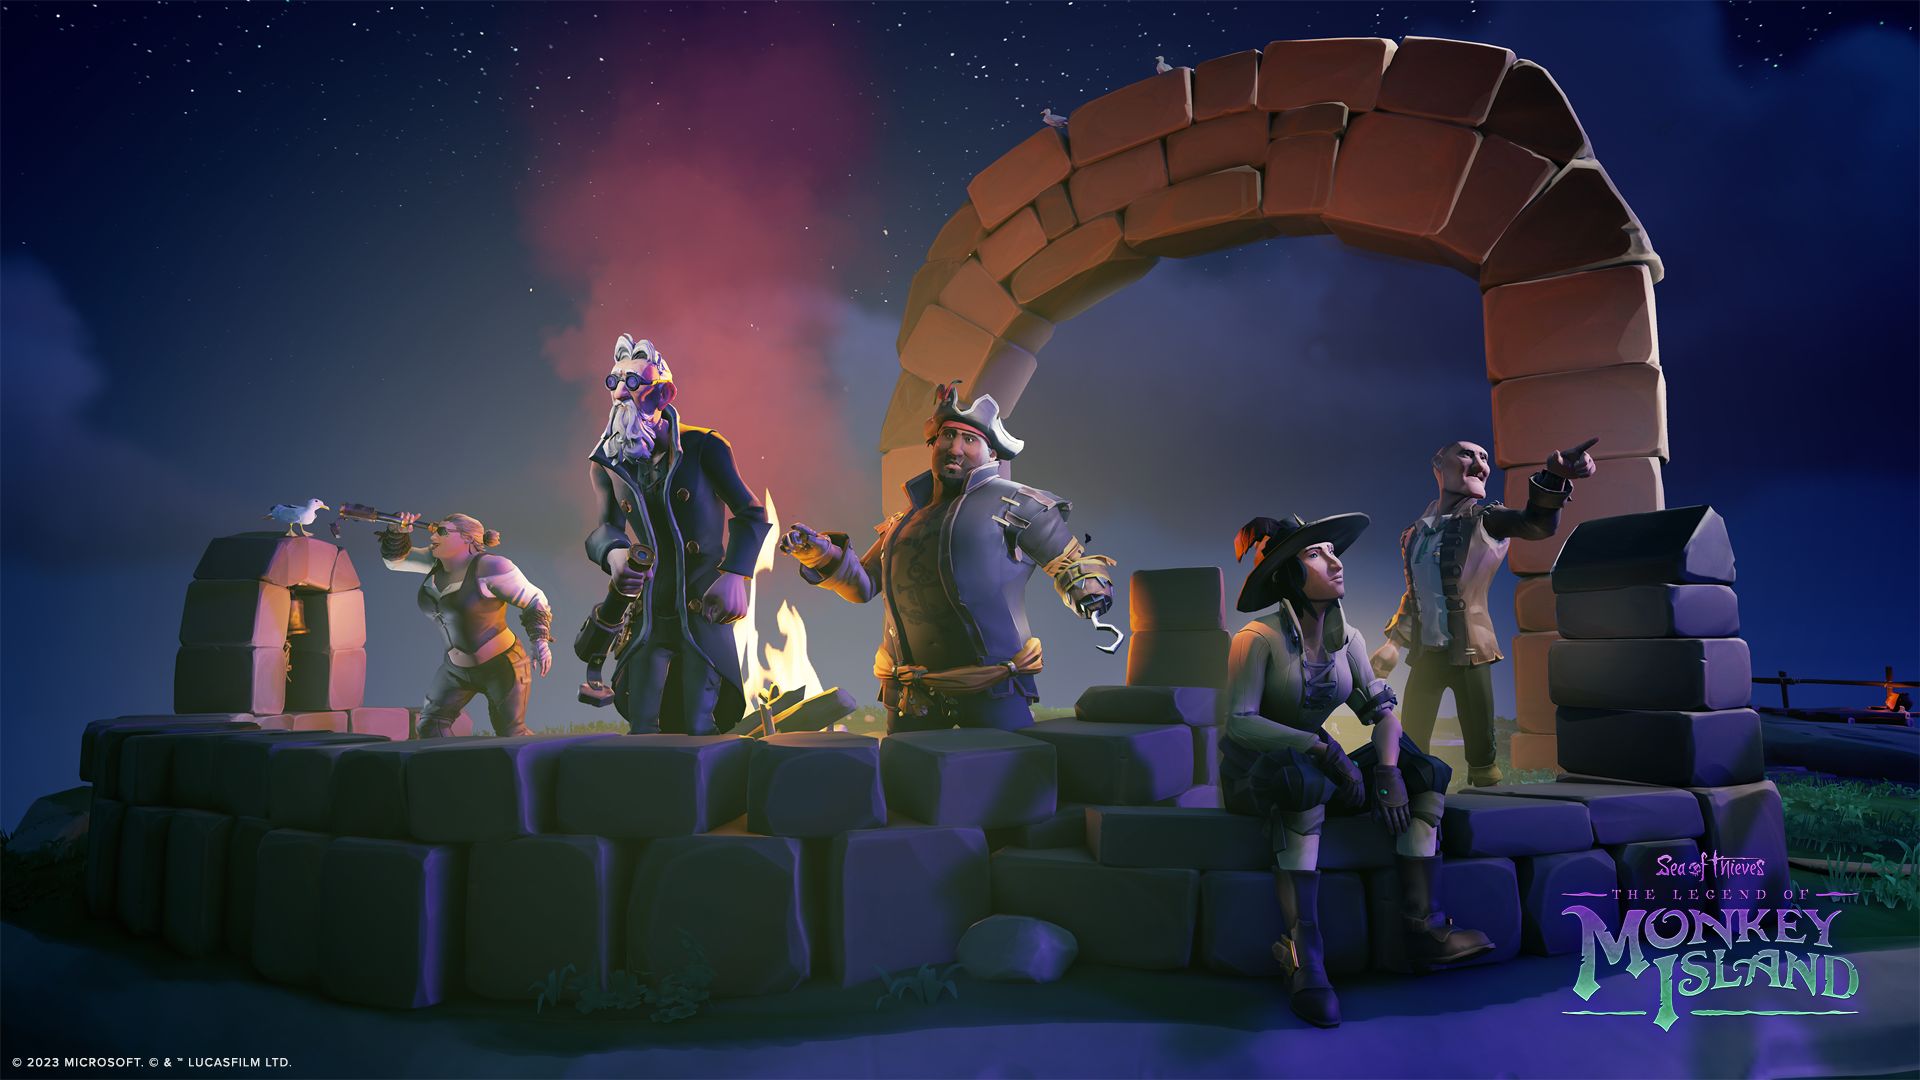 The Legend of Monkey Island: How Sea of Thieves Is Translating Monkey Island’s Story, Gameplay, and Extra – an Unique Interview